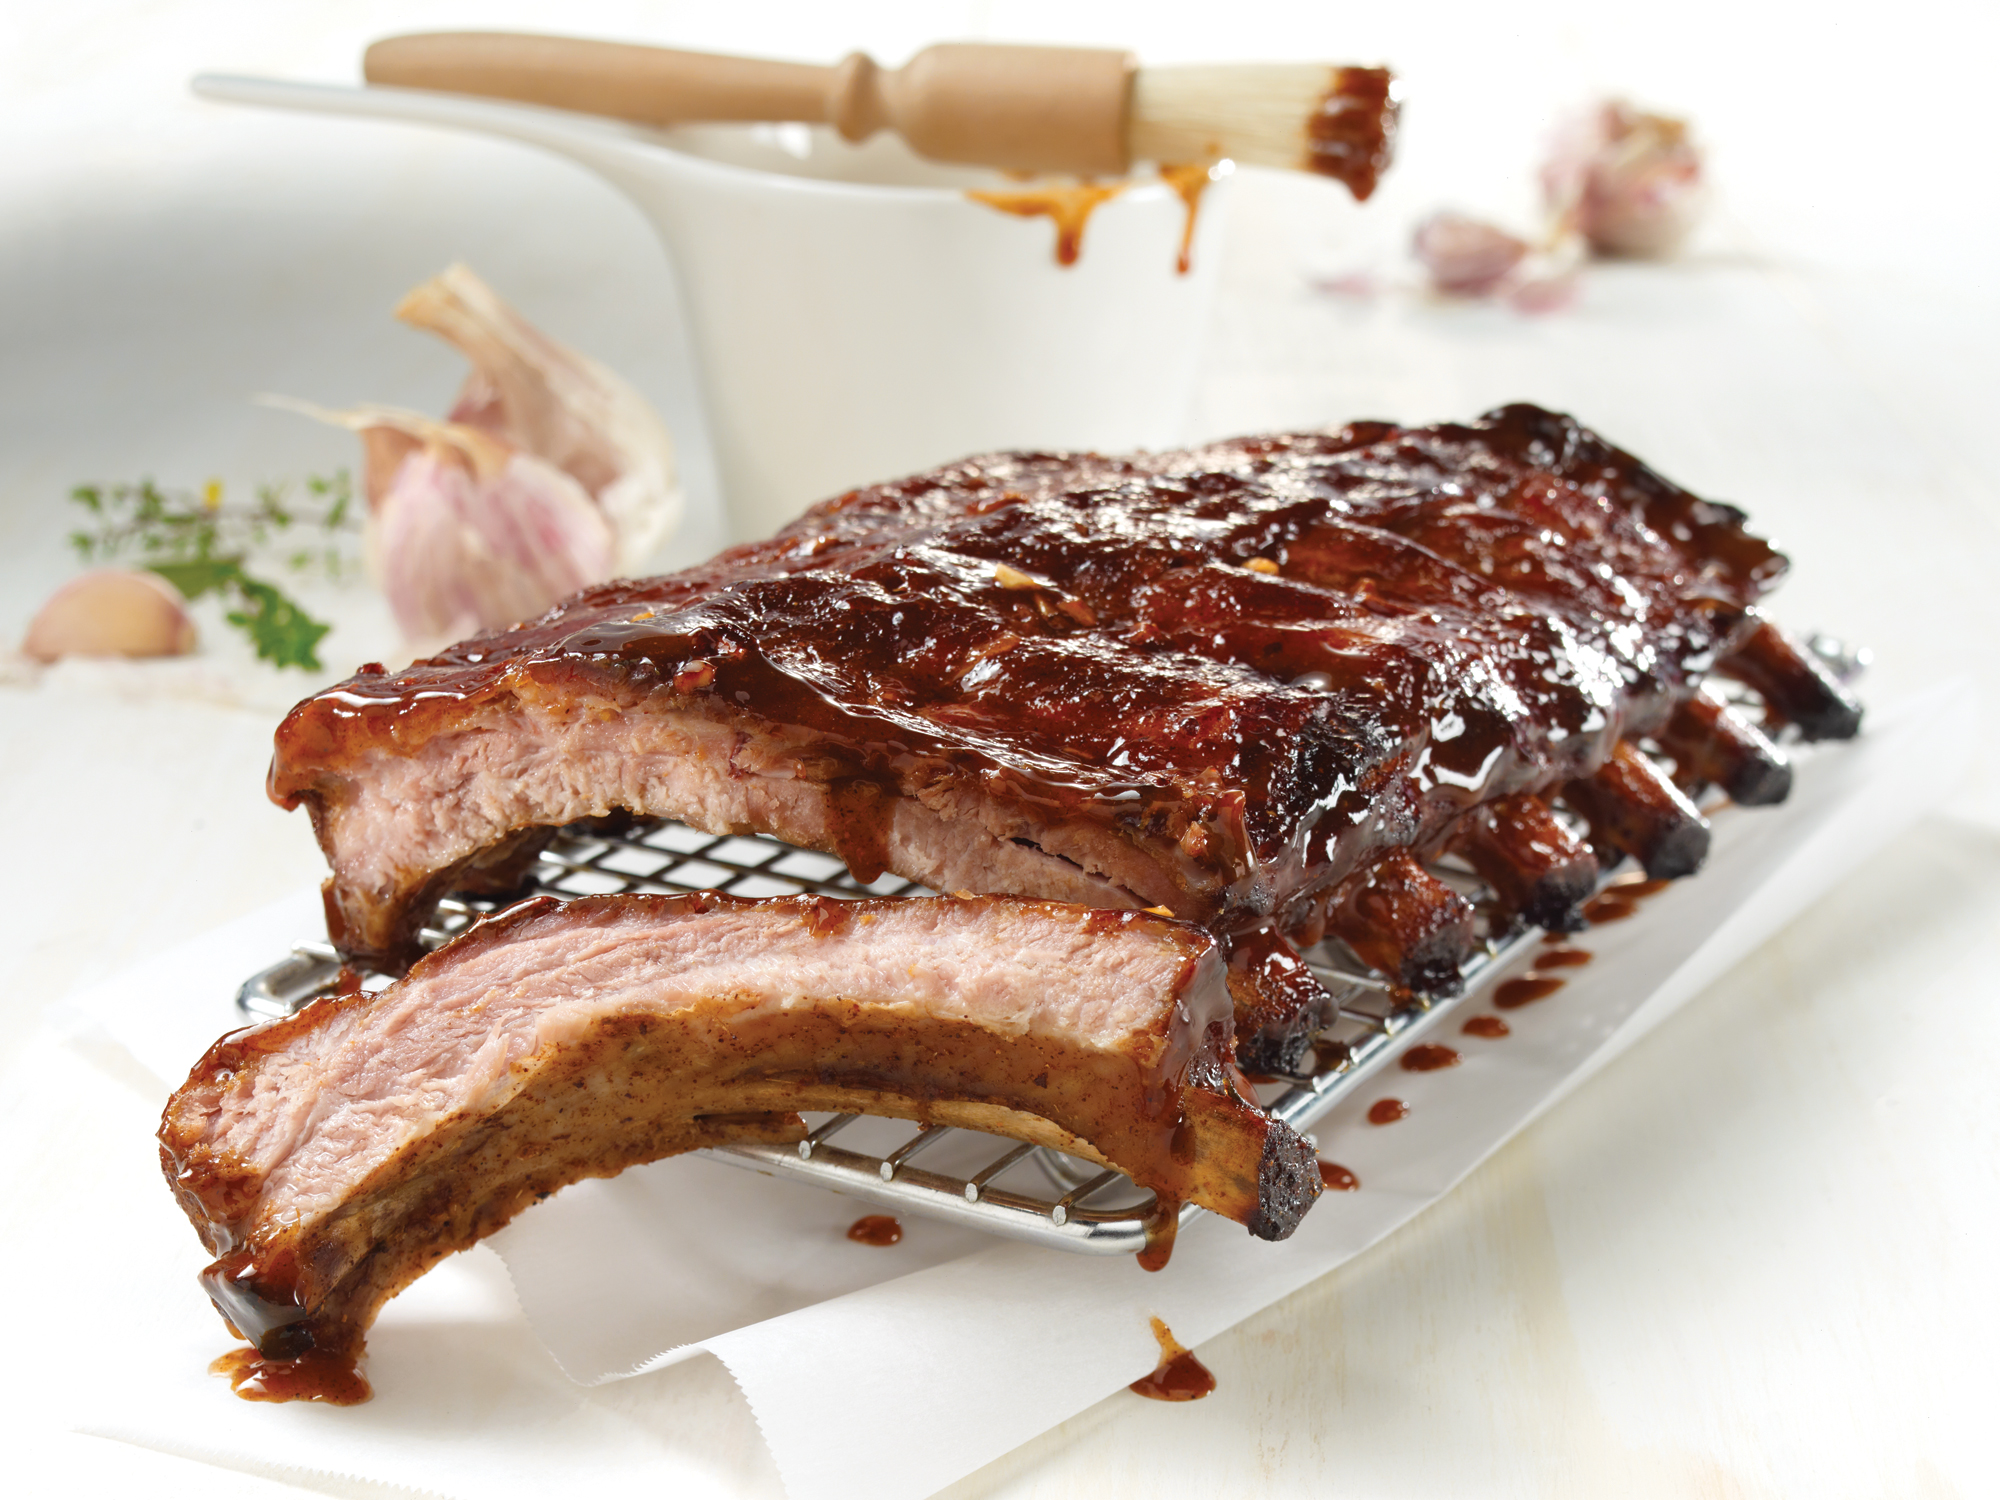 Pork baby back ribs with red ale and maple syrup sauce.